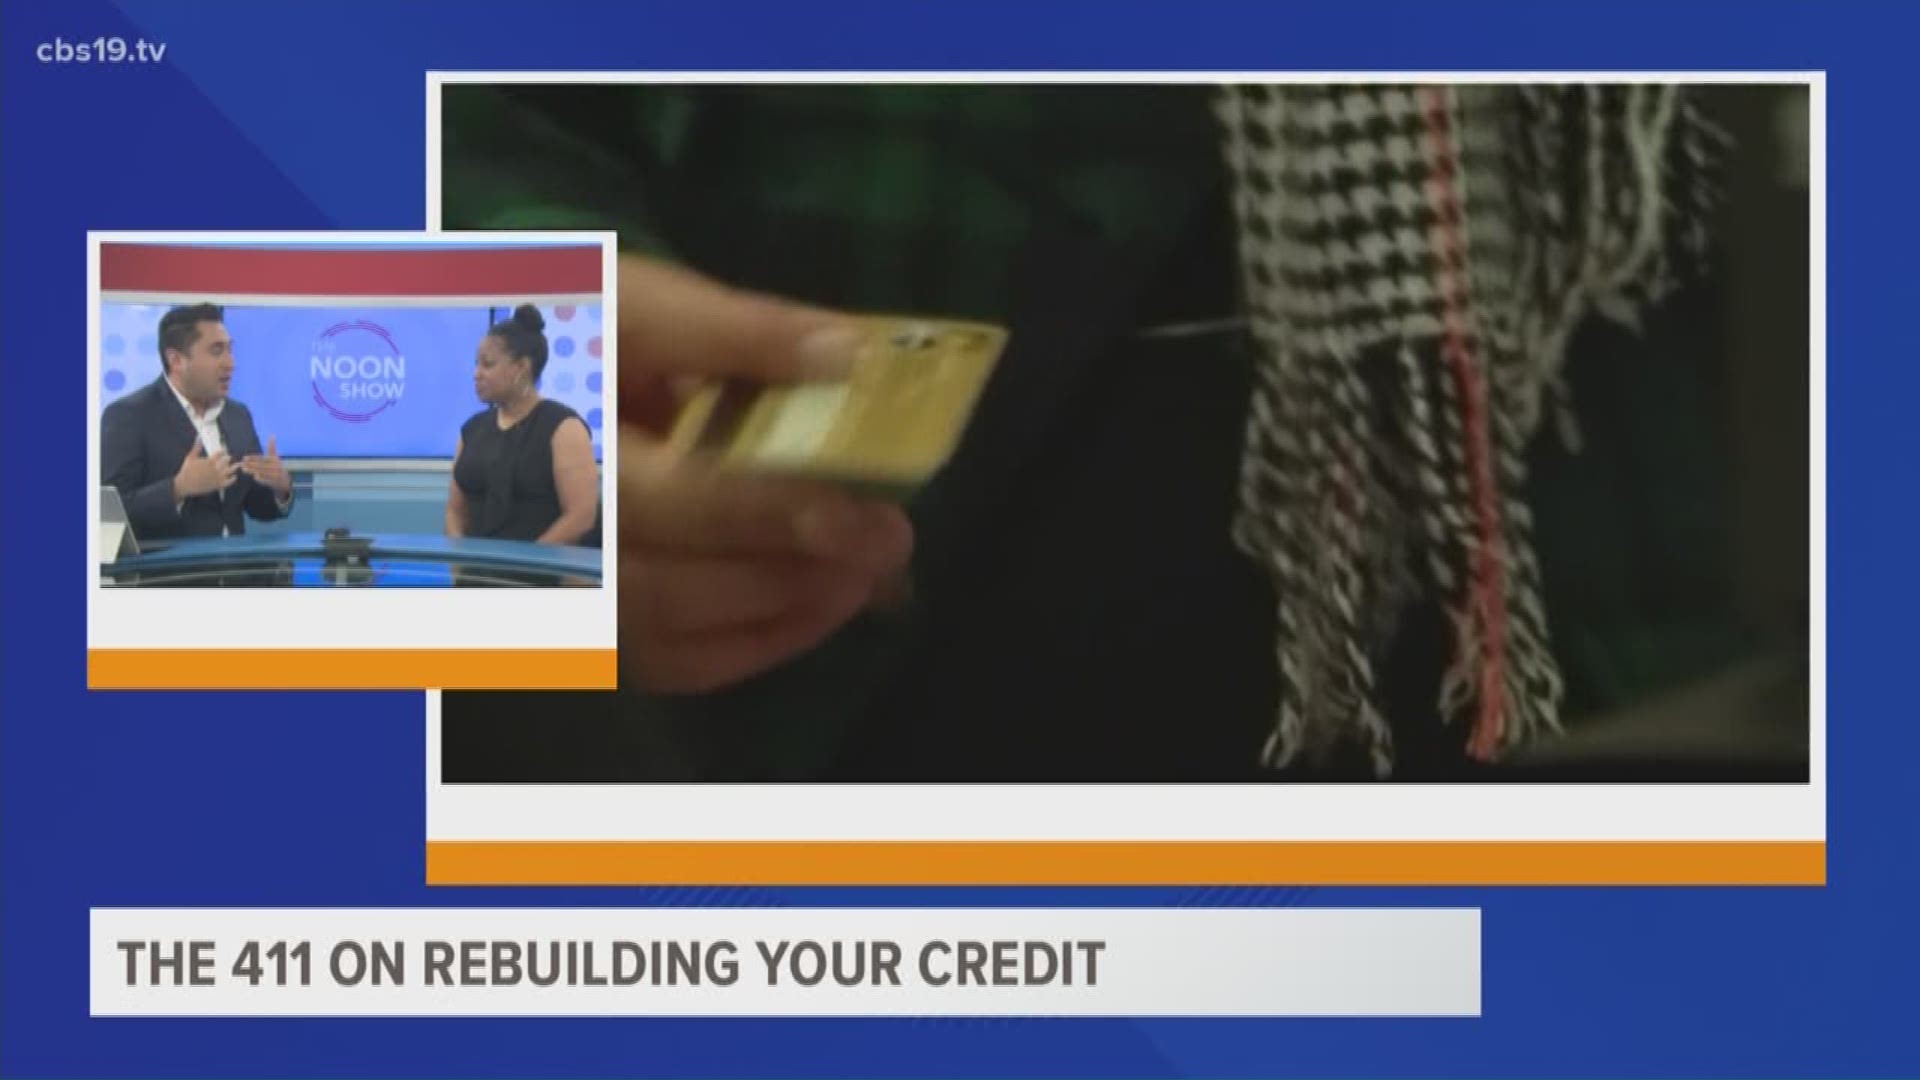 Are you drowning in debt?
LaRon Chadwick with Chadwick Financial Solutions has some advice  to help you rebuild your credit.